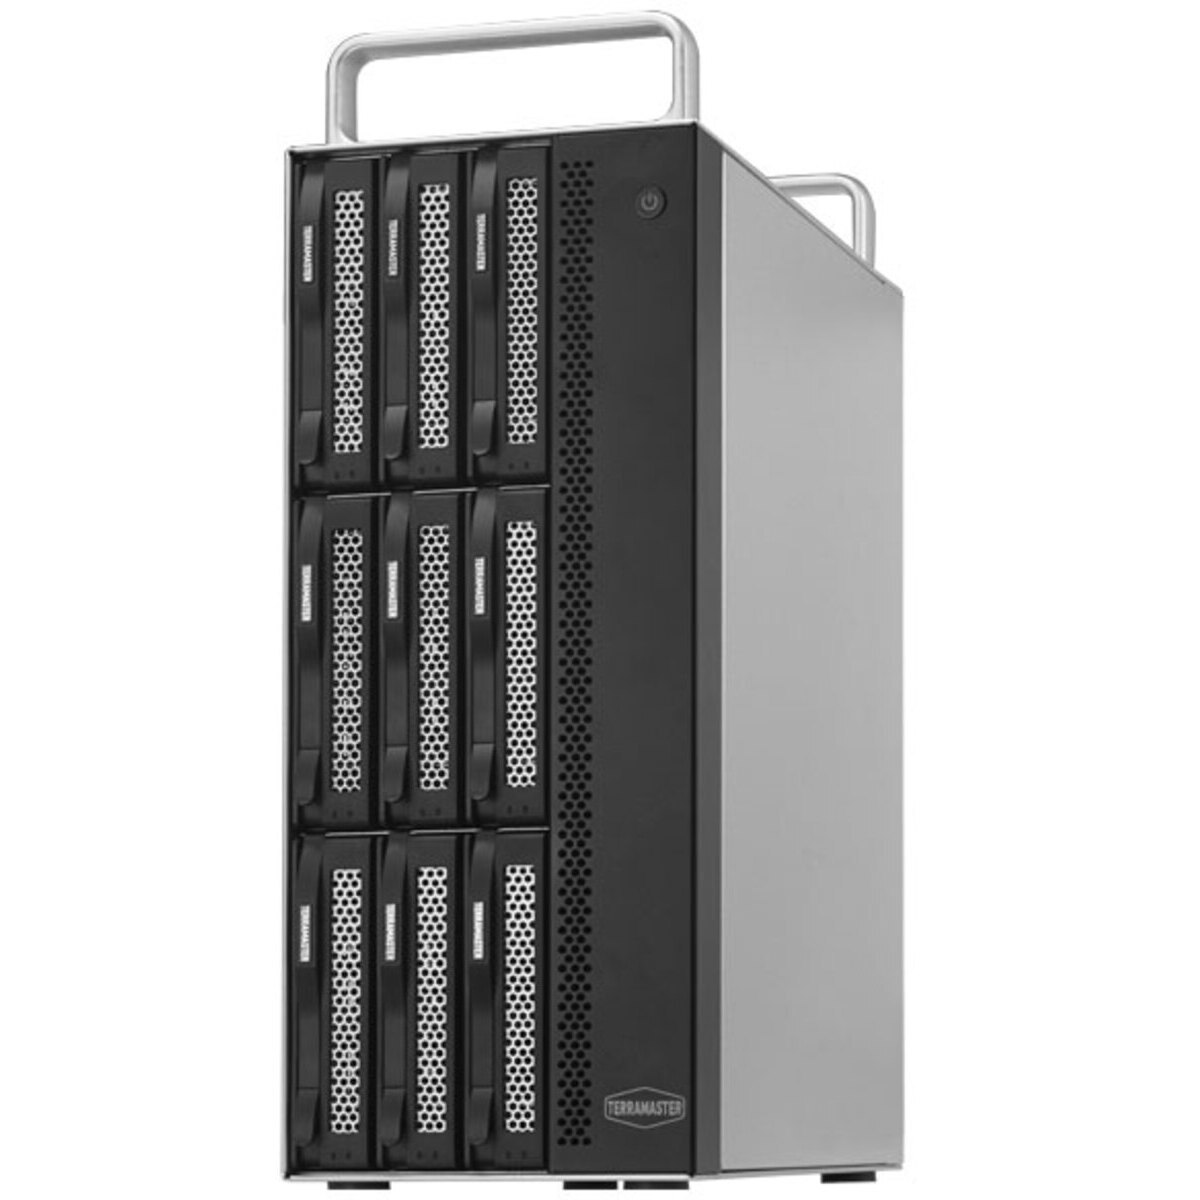 TerraMaster D8-322 88tb 8-Bay Desktop Multimedia / Power User / Business DAS - Direct Attached Storage Device 4x22tb Seagate EXOS X22 ST22000NM001E 3.5 7200rpm SATA 6Gb/s HDD ENTERPRISE Class Drives Installed - Burn-In Tested D8-322